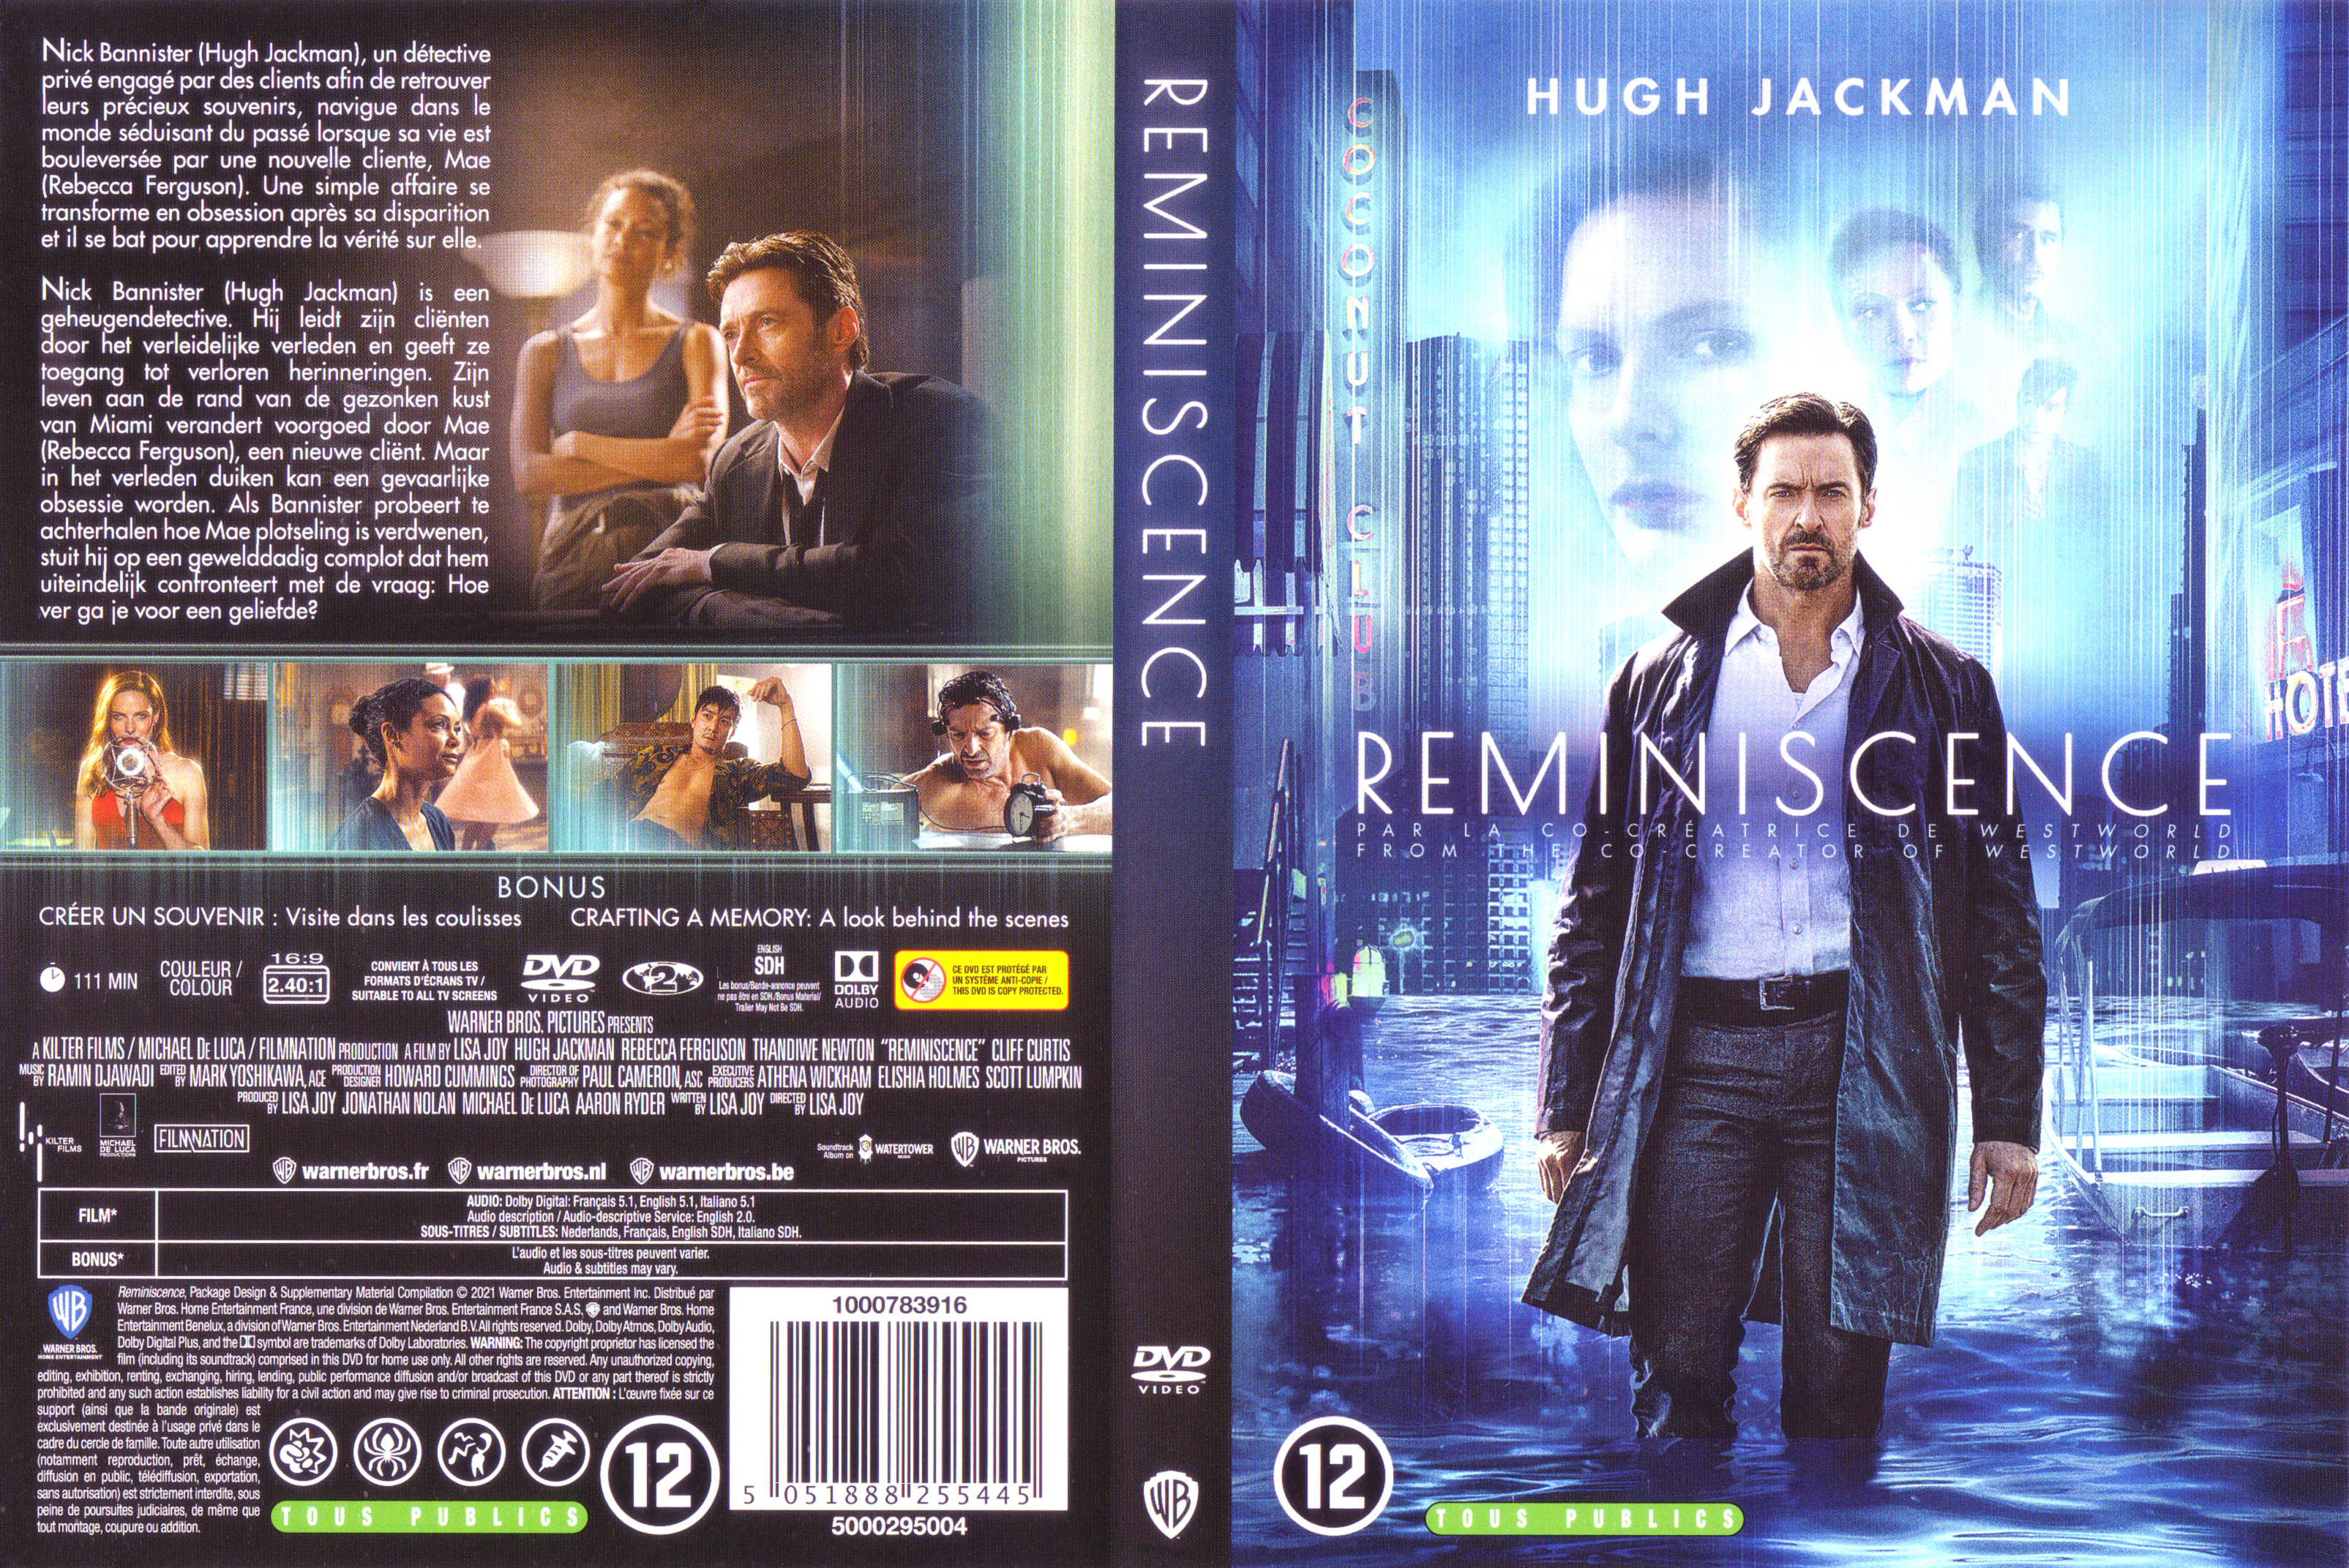 Jaquette DVD Reminiscence